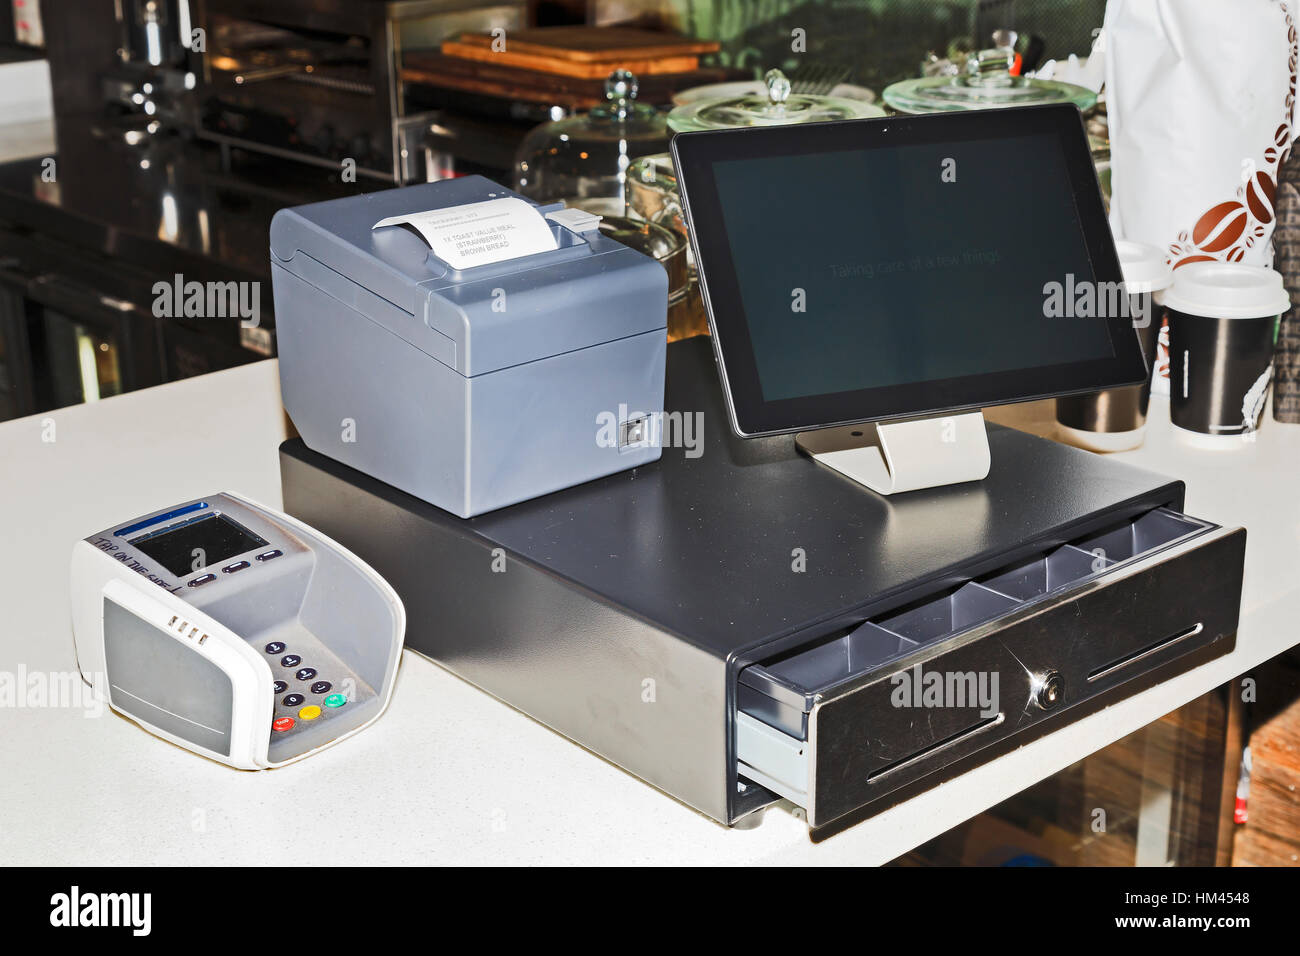 Point of sales computer terminal with touch screen tablet, cash register, mobile printer and card payment on a counter at a coffee shop. Stock Photo